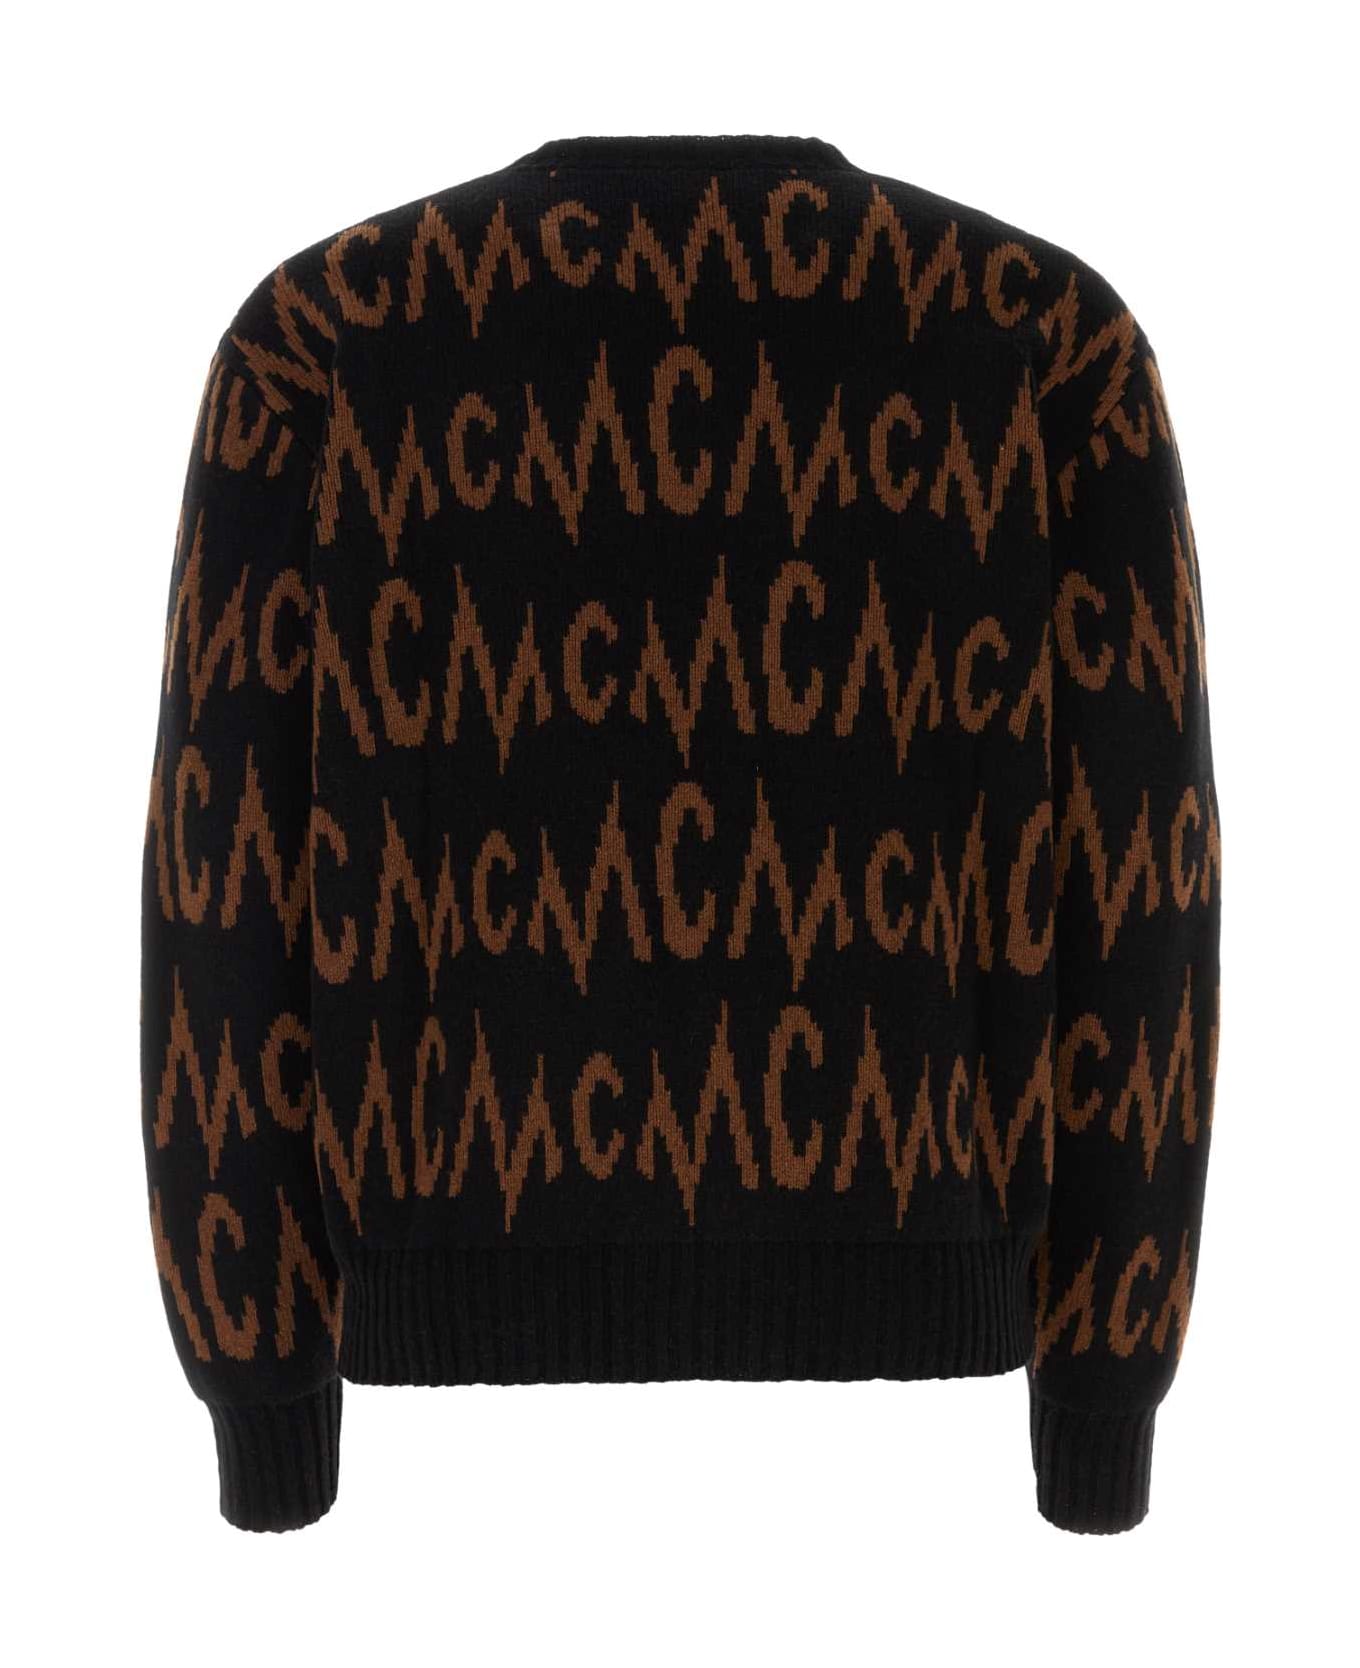 MCM Embroidered Cashmere Blend Sweater - BLACK